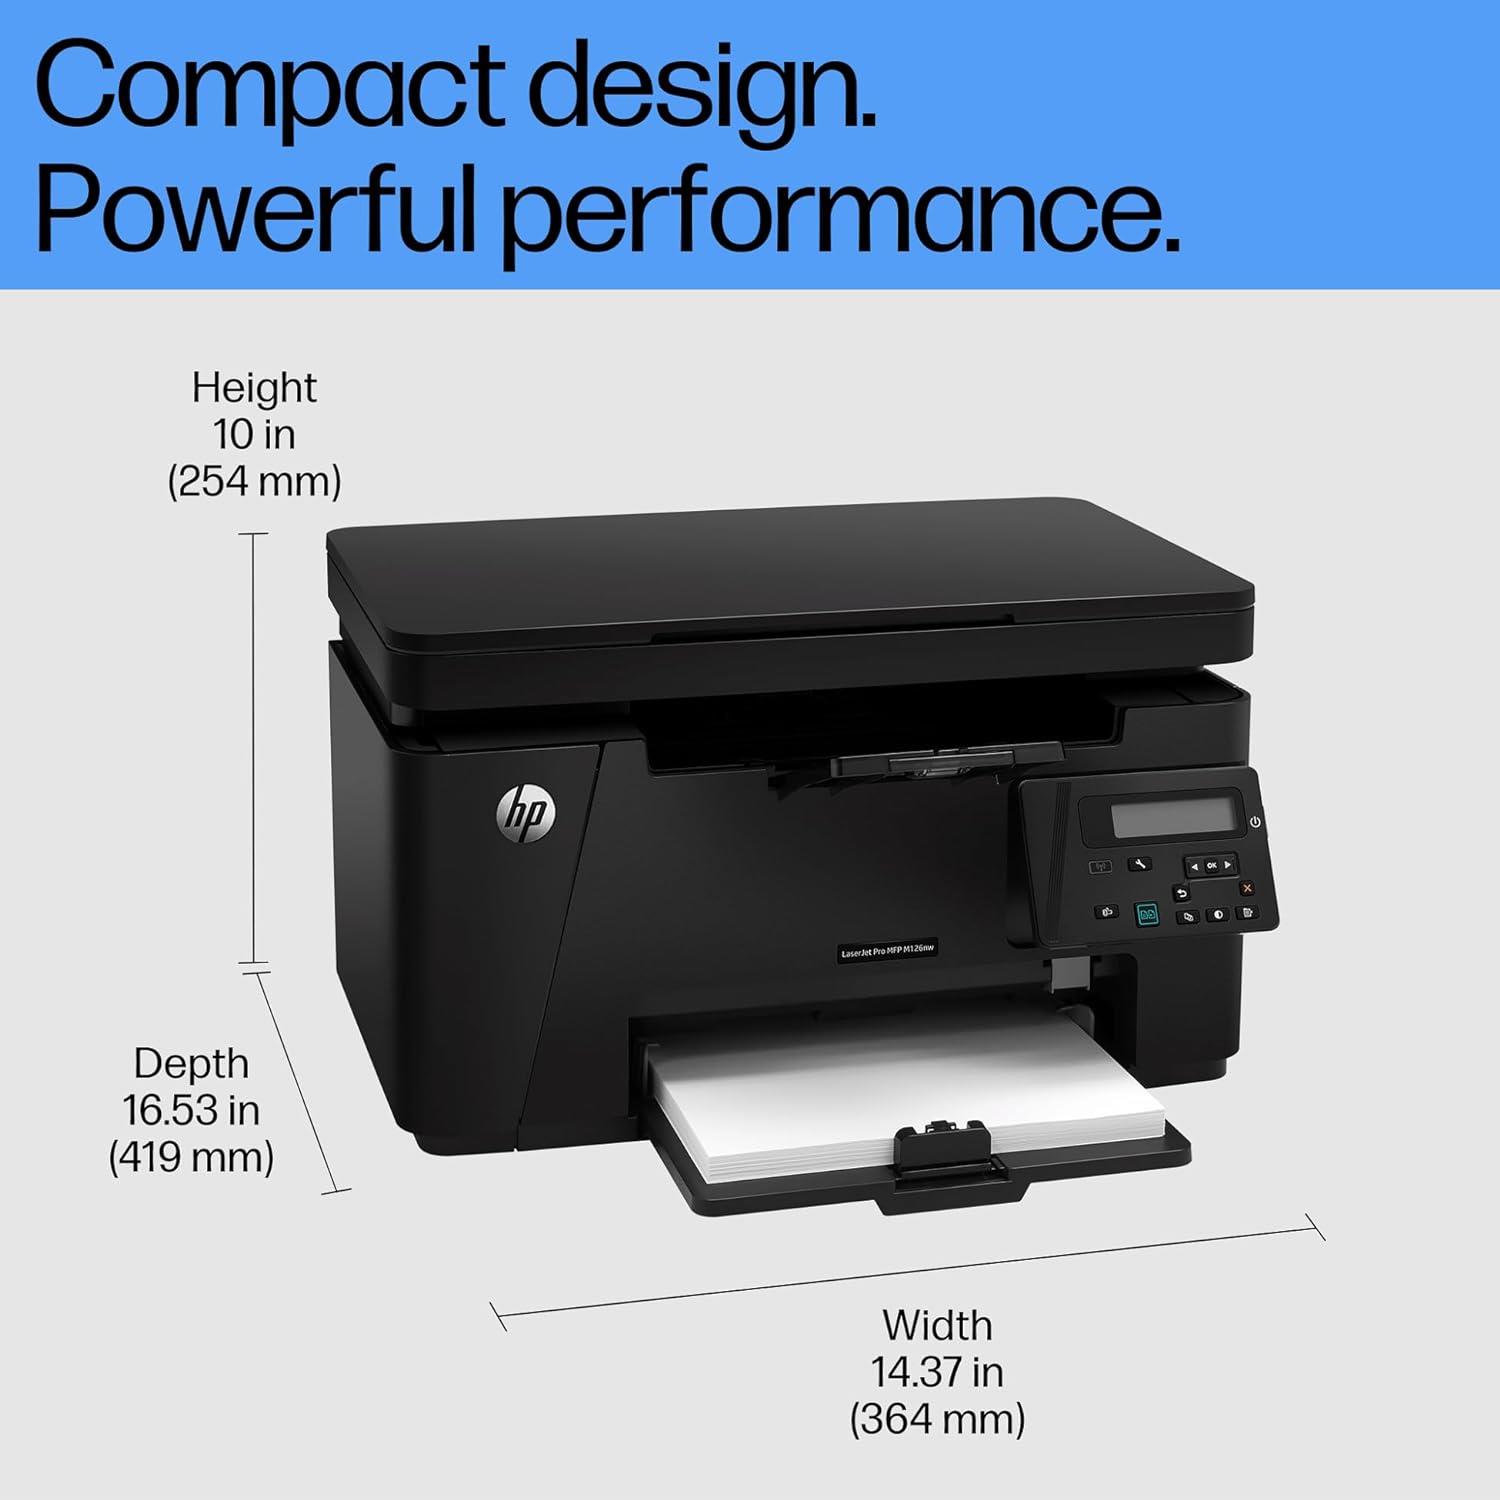 HP Laserjet Pro M126nw All-In-One B&W Printer For Home: Print, Copy, & Scan, Affordable, Compact, Easy Mobile Printing